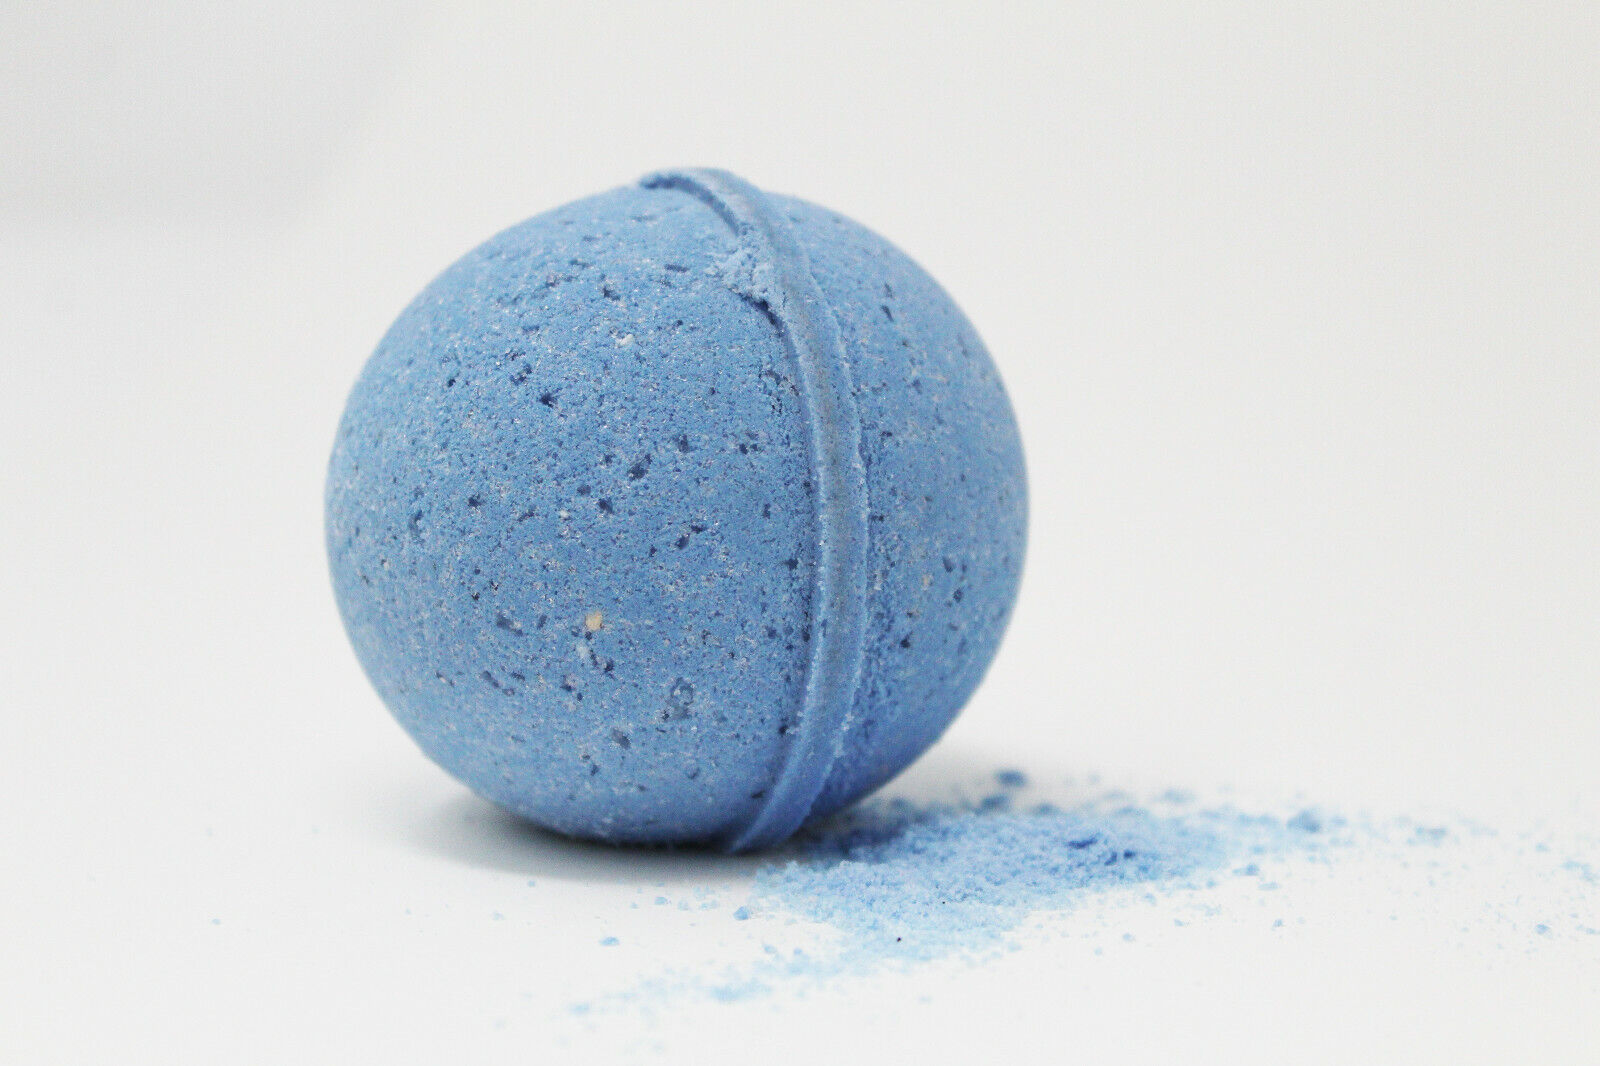 WTF Ranking TOP5 Free shipping New Bath Bombs Blue Balls Bachelorette Adult Product Bomb W